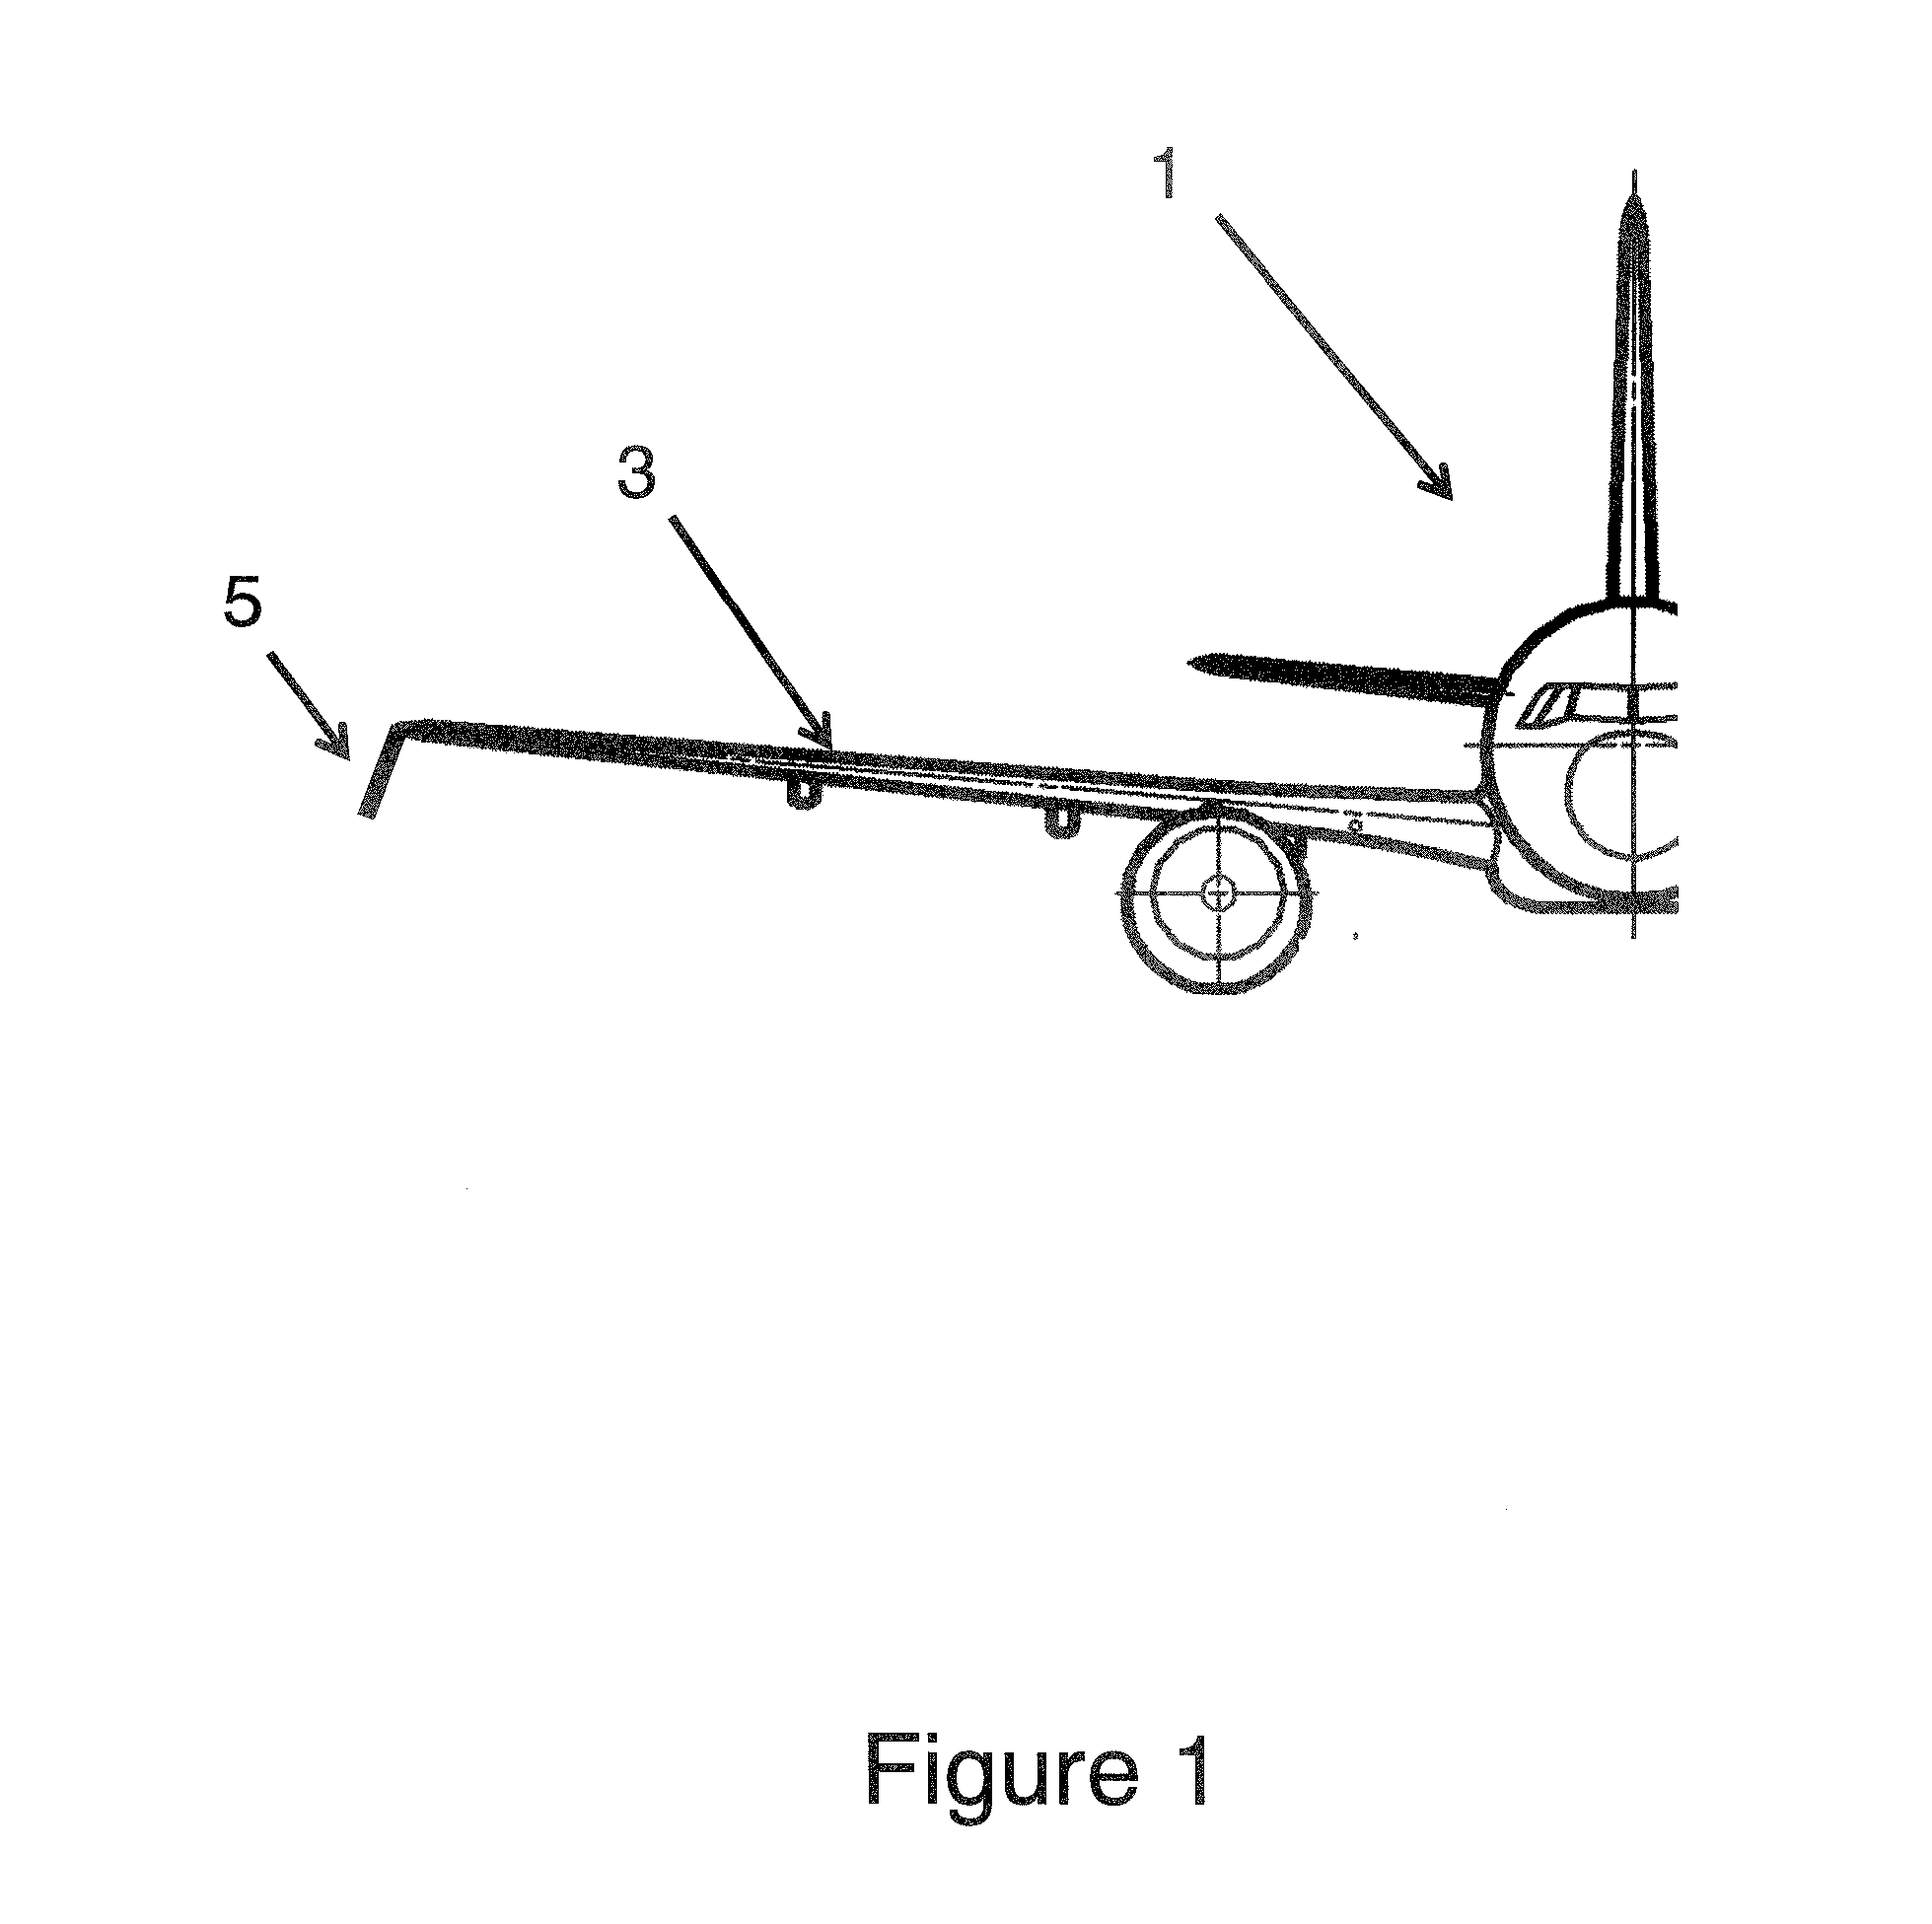 Downwardly extending wing tip device